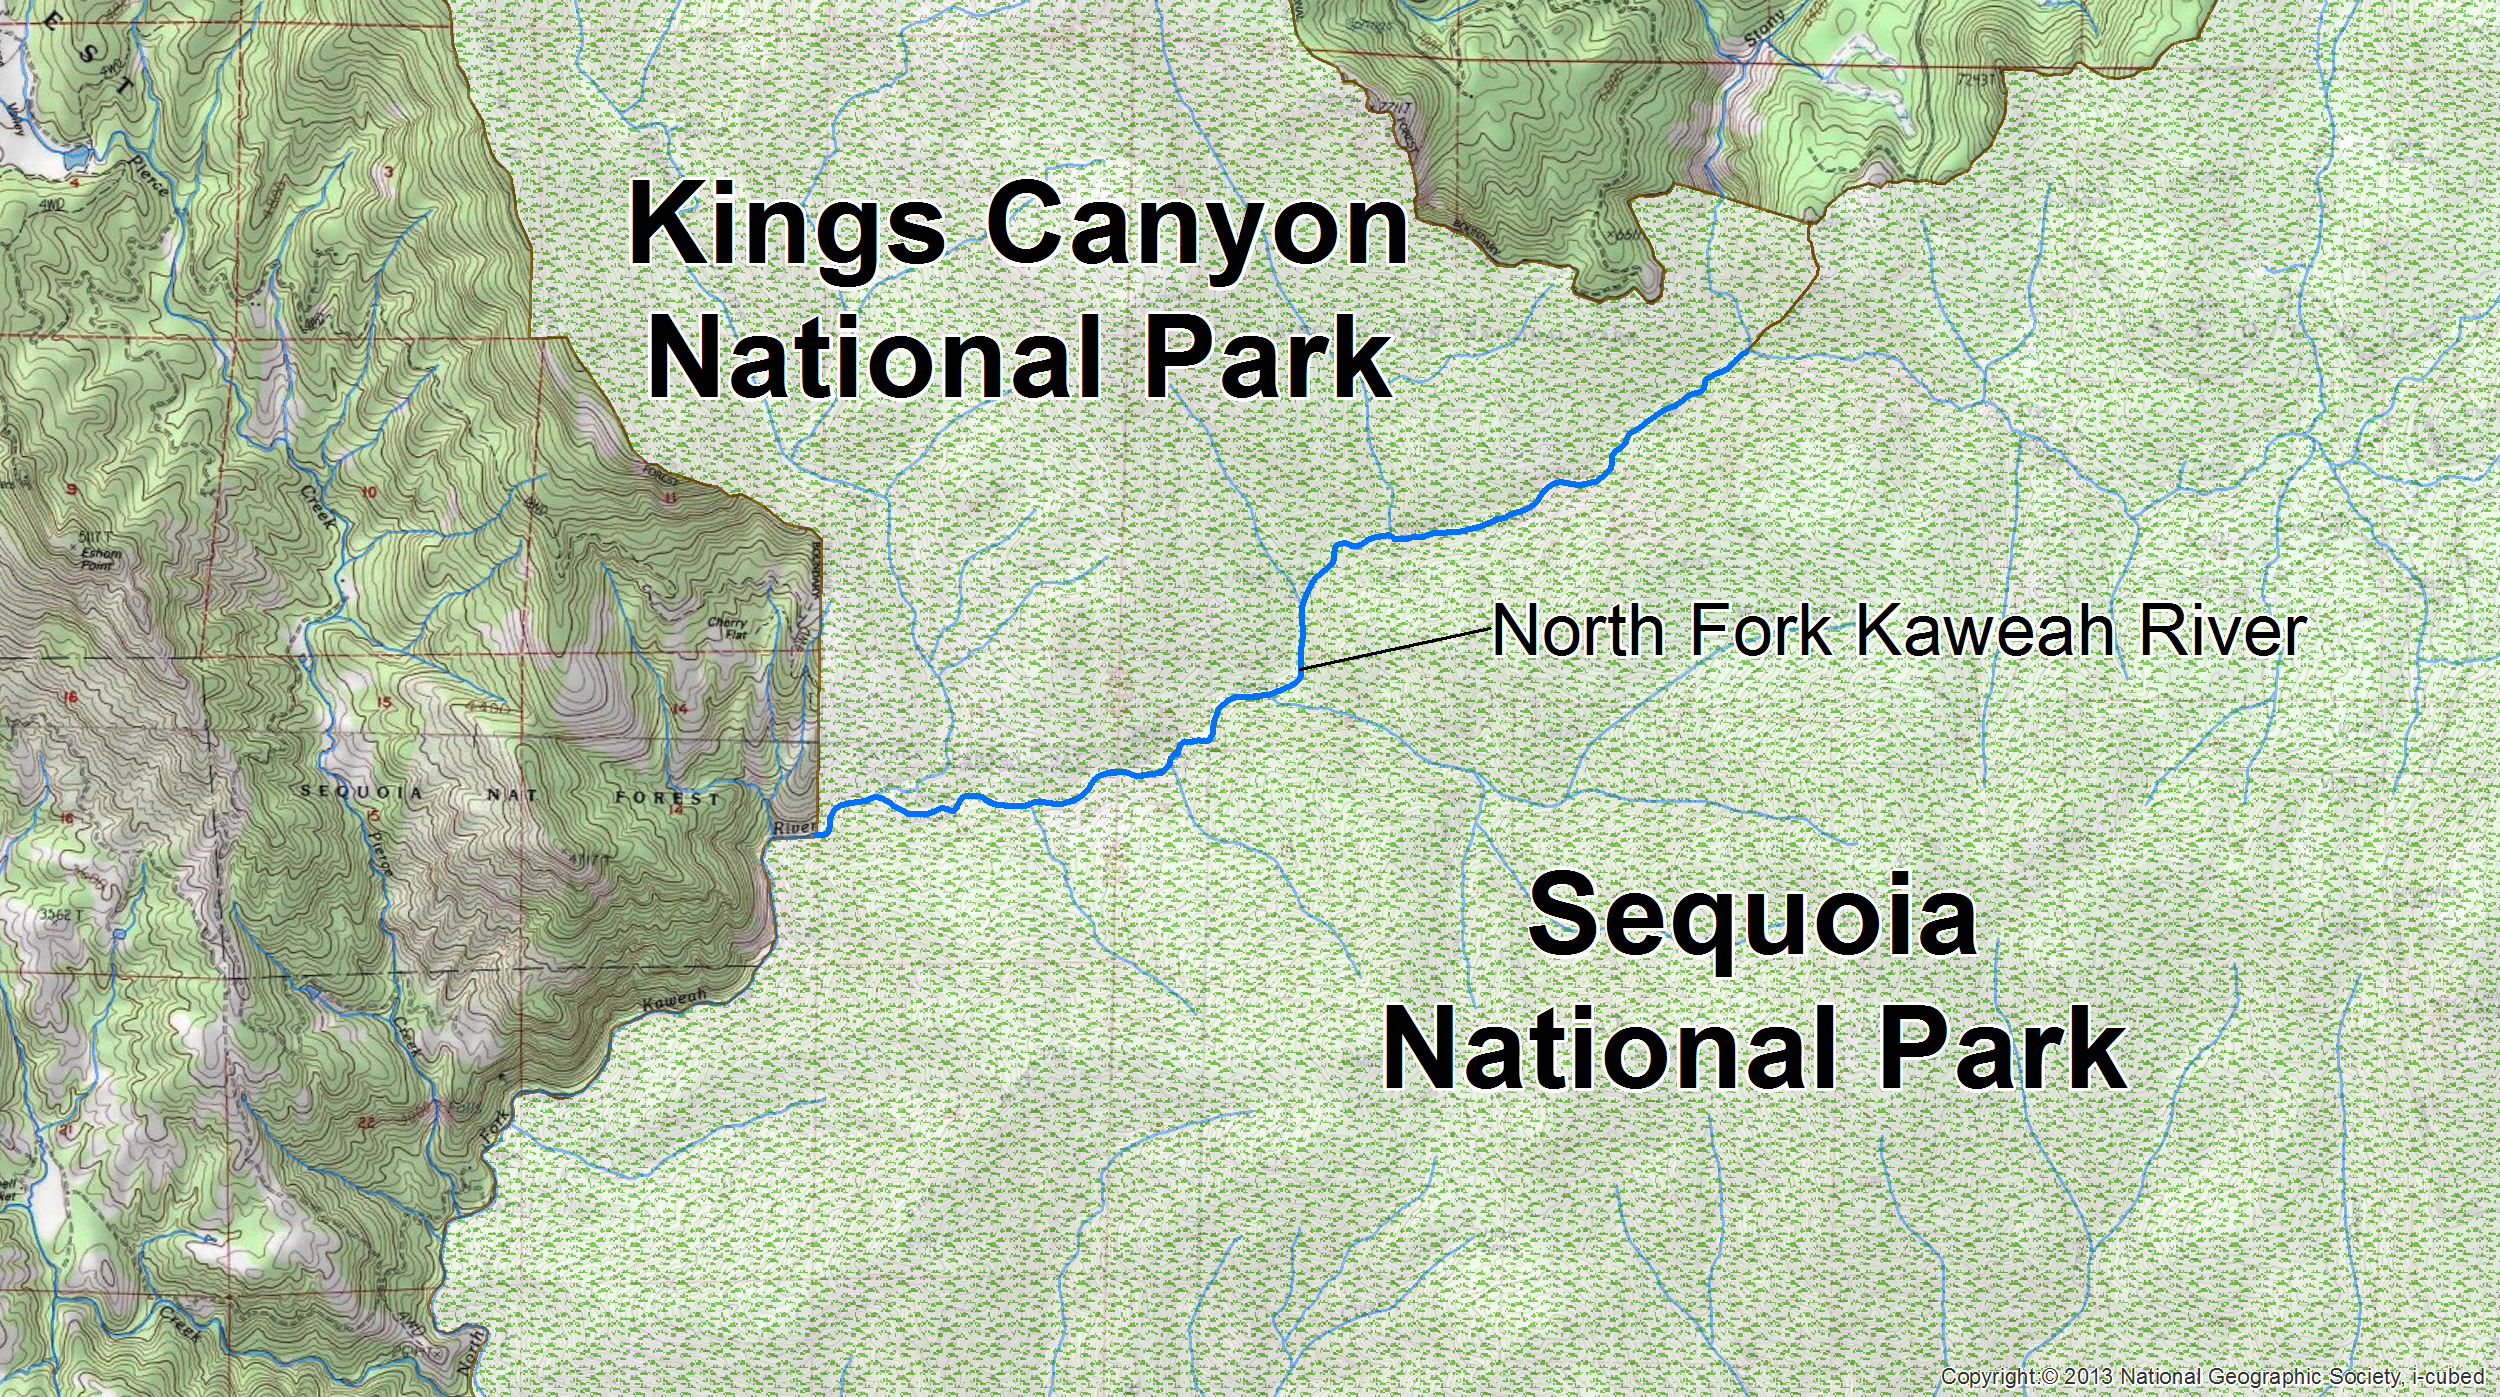 In the case of Sequoia and Kings Canyon National Parks, each park gets credit for the 3.84 mile shared portion of the North Fork Kaweah River, but the service-wide summation only includes this segment once.